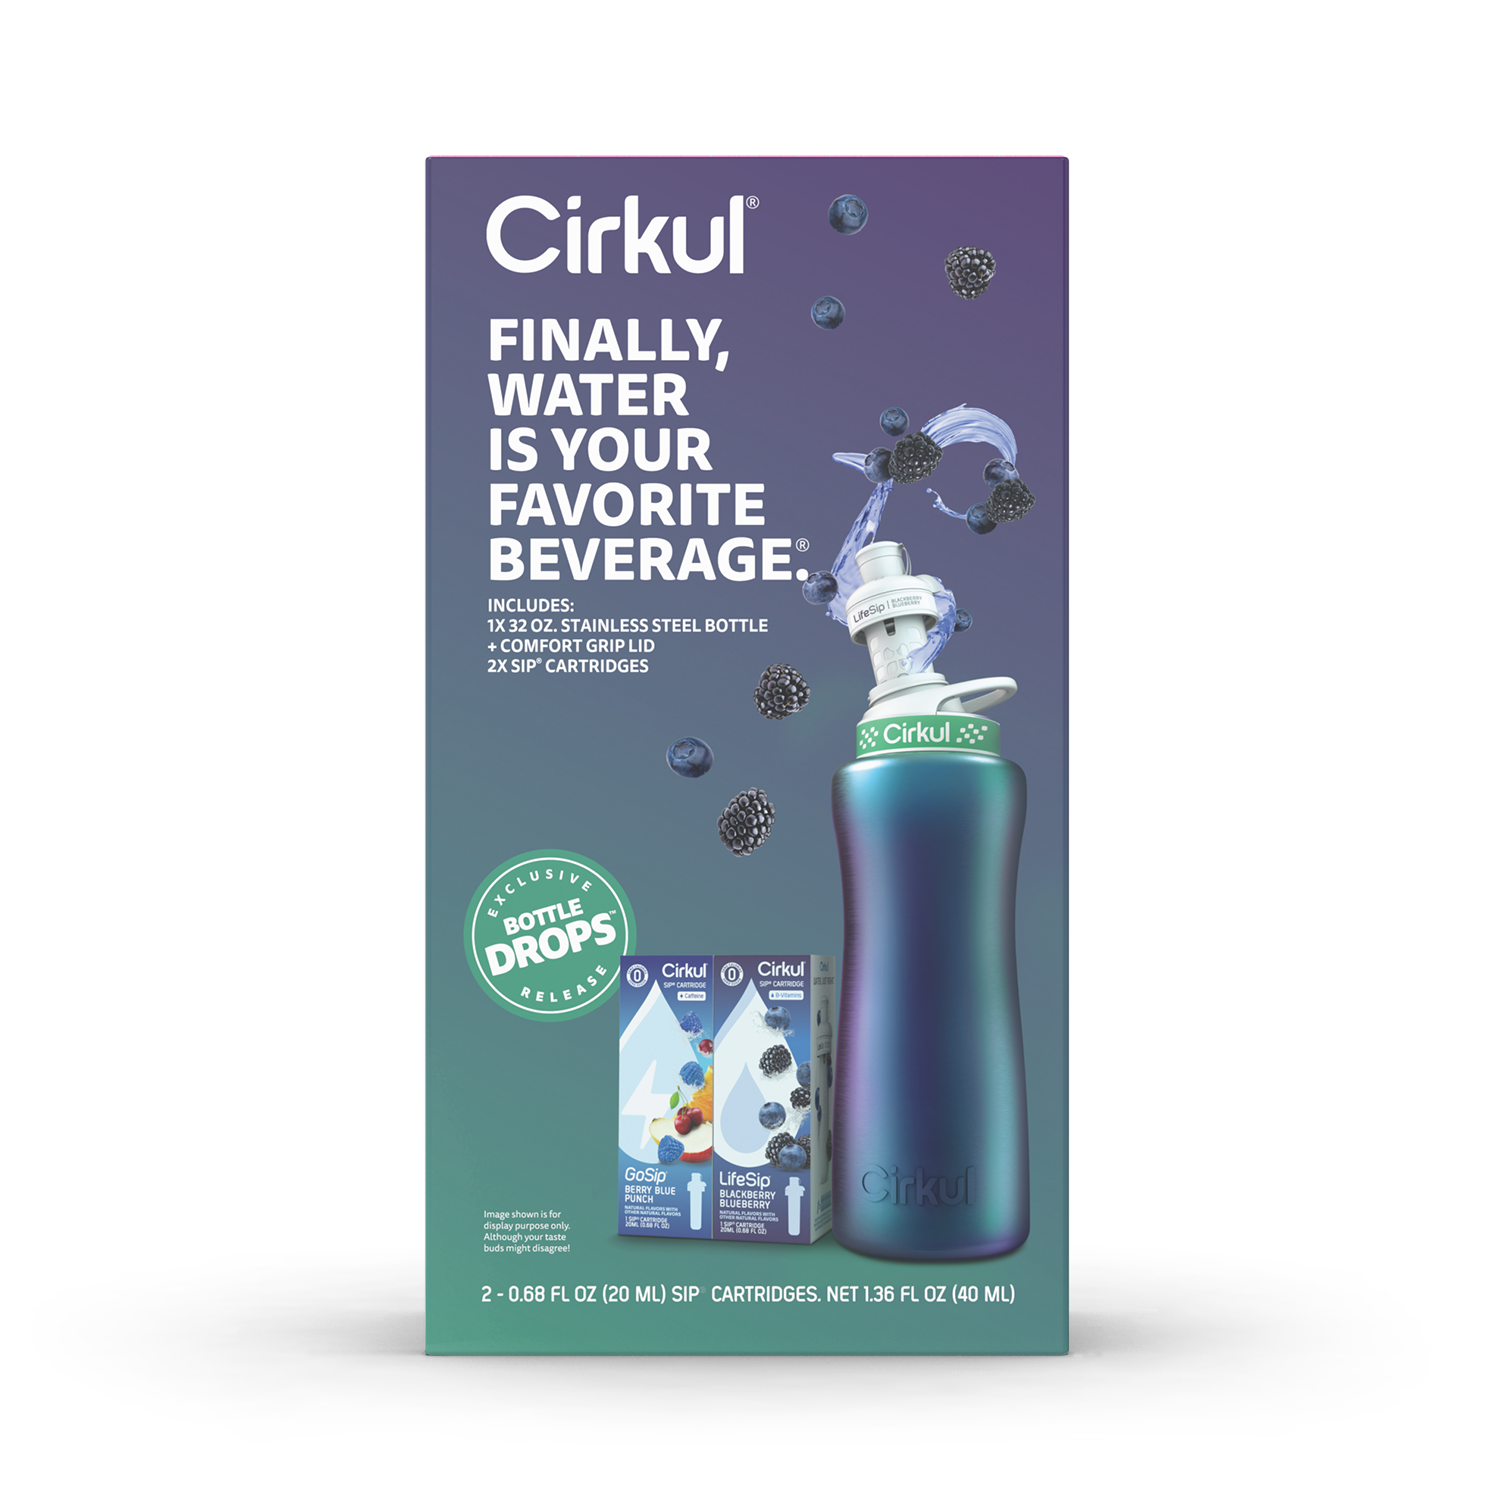 Cirkul 32oz Chameleon Stainless Steel Starter Kit with Teal & White Cirkul Lid 2.0 and 2 Flavor Cartridges (Blackberry Blueberry & Berry Blue Punch) - image 5 of 5